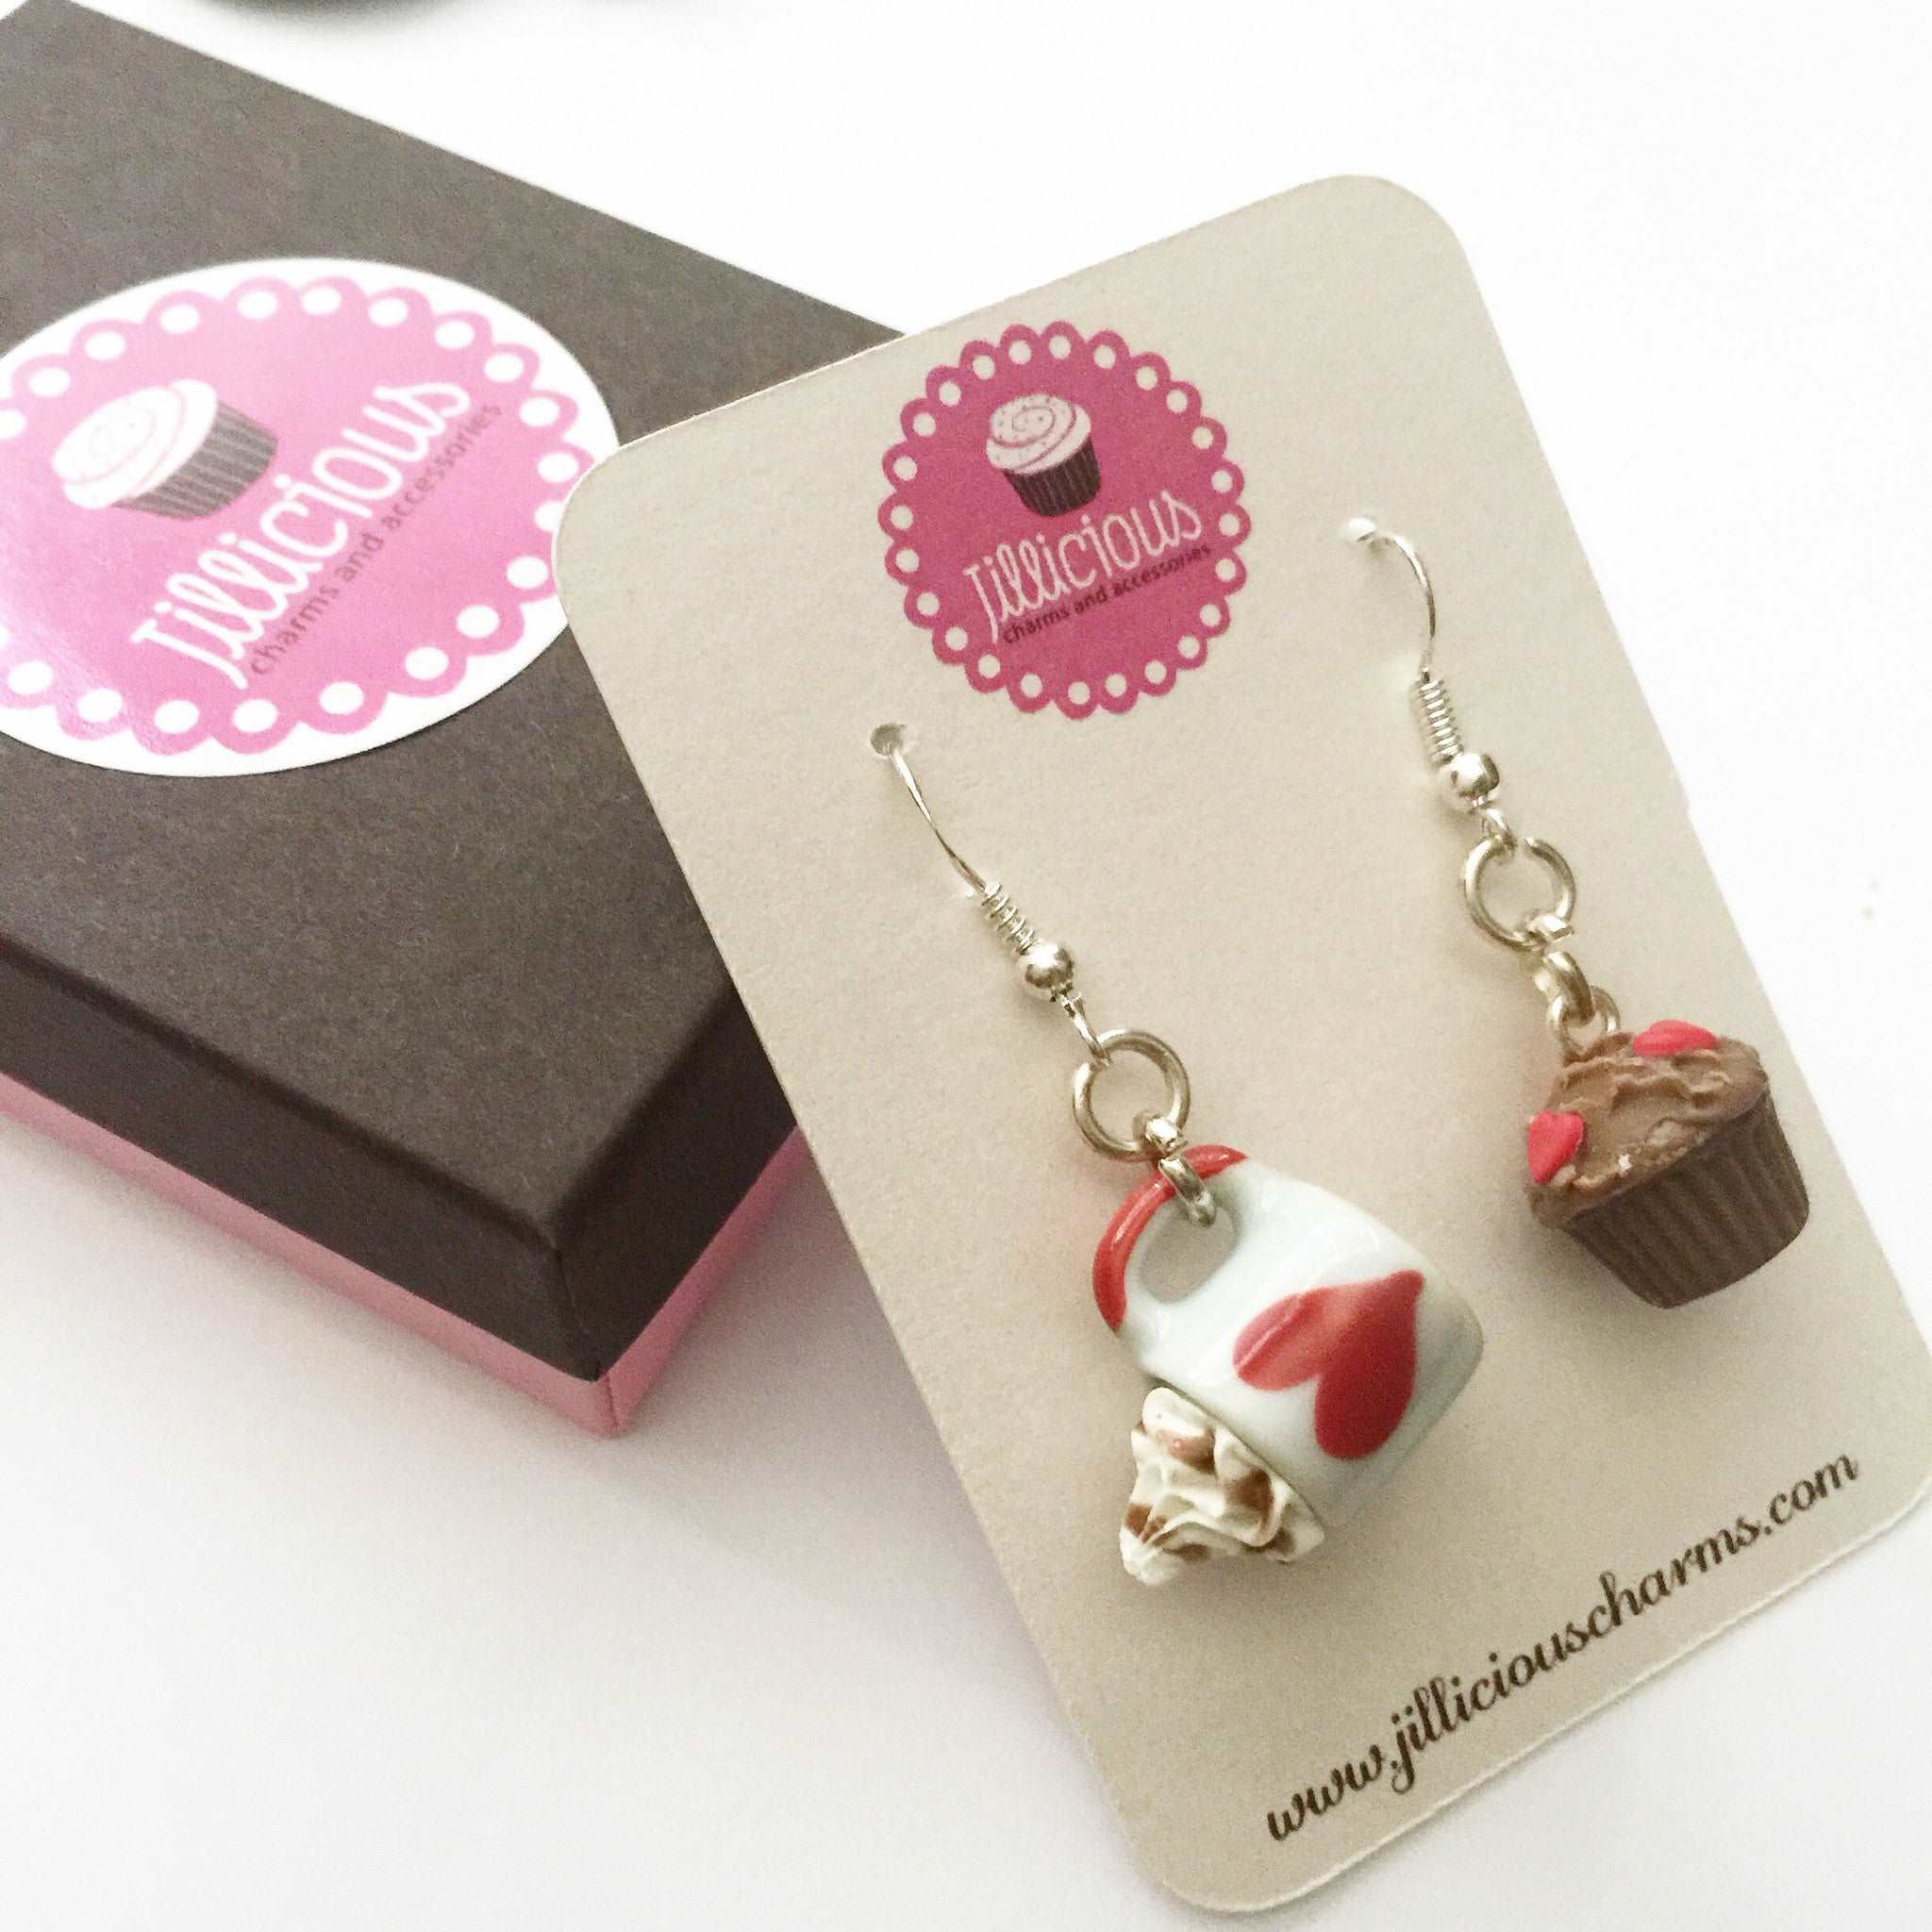 Alice in Wonderland Inspired Dangle Earrings - Jillicious charms and accessories